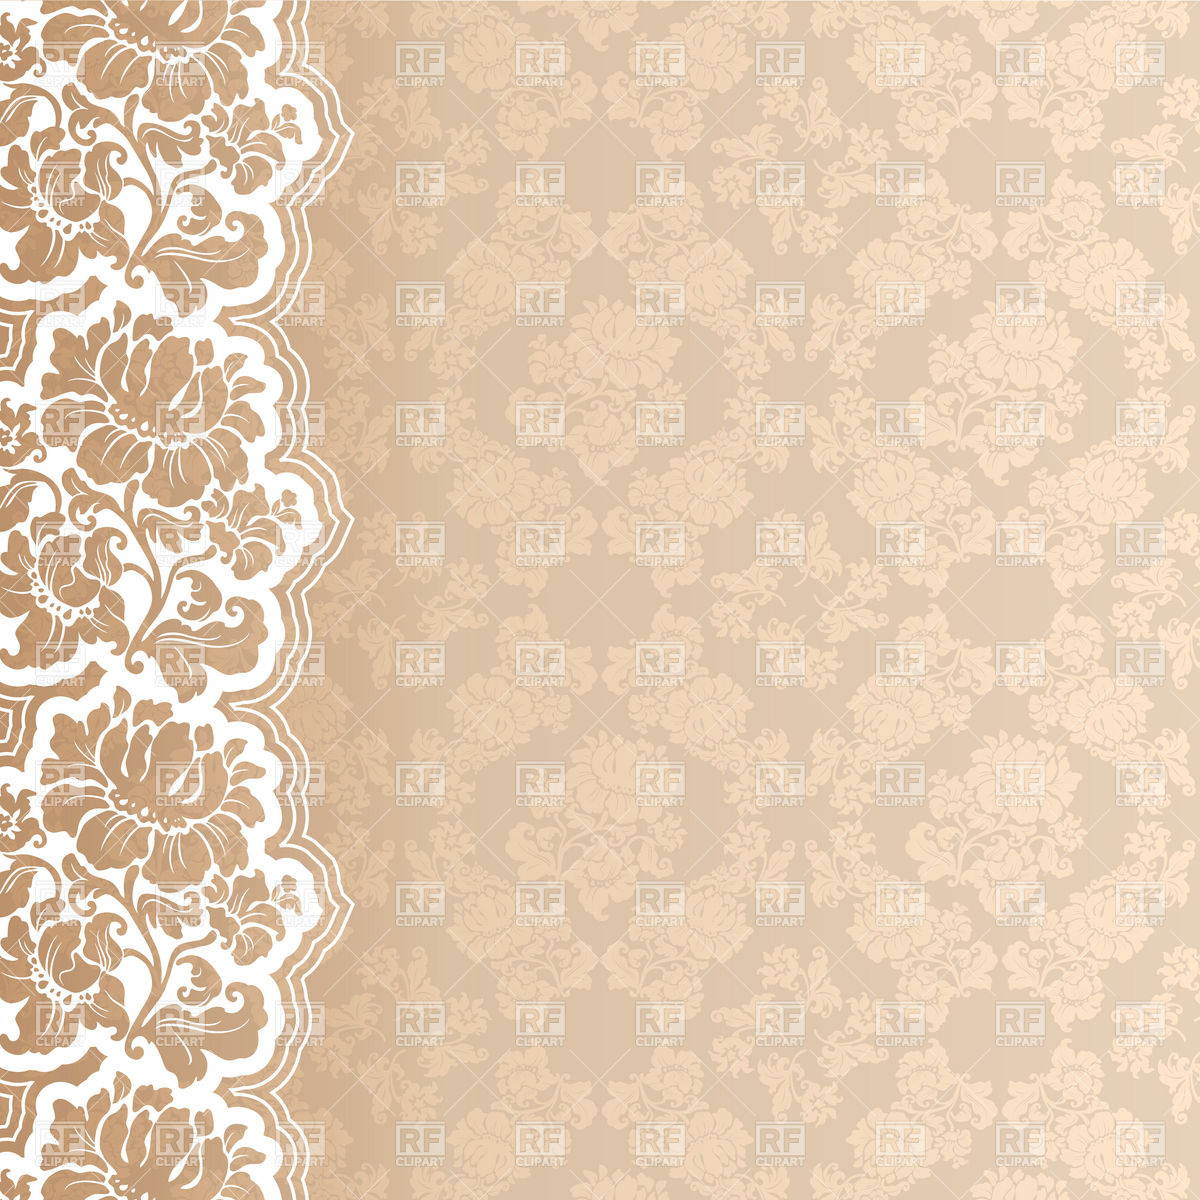 to backgrounds tumblr free use WallpaperSafari   Background Lace Wallpaper